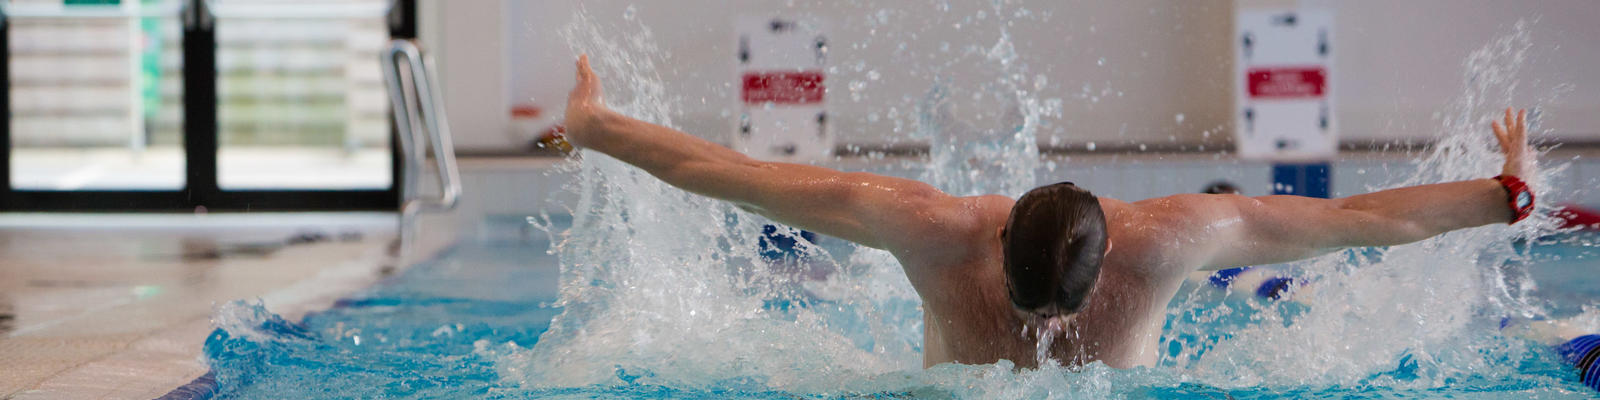 Male swimmer using the pool